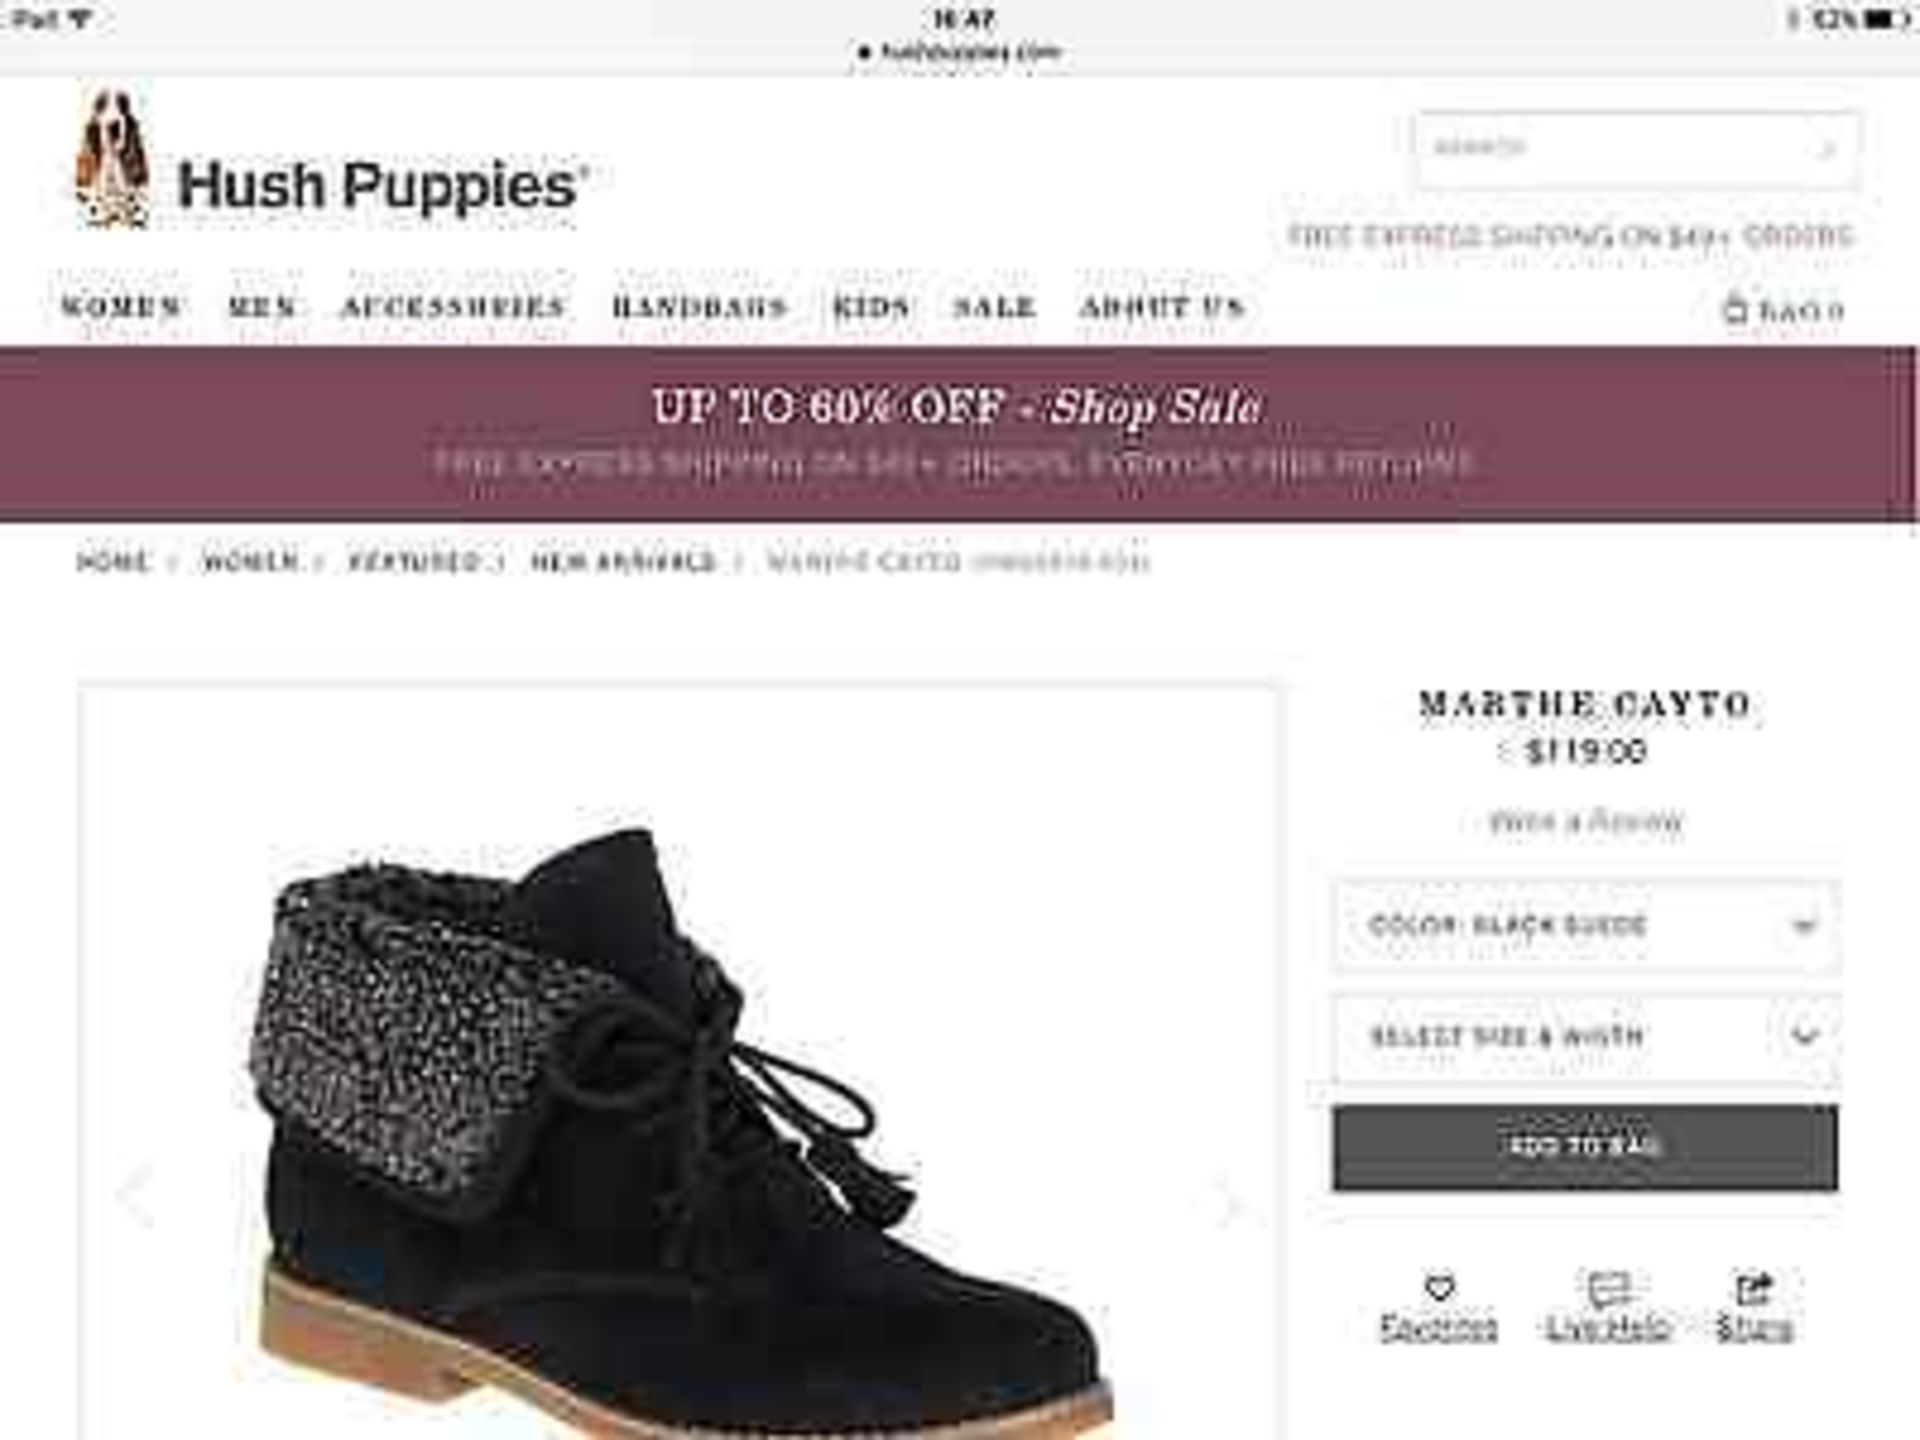 Hush Puppies Black Suede Martha Cayto Ankle Boot, Size UK 7, RRP £100 (New with box) - Image 3 of 12